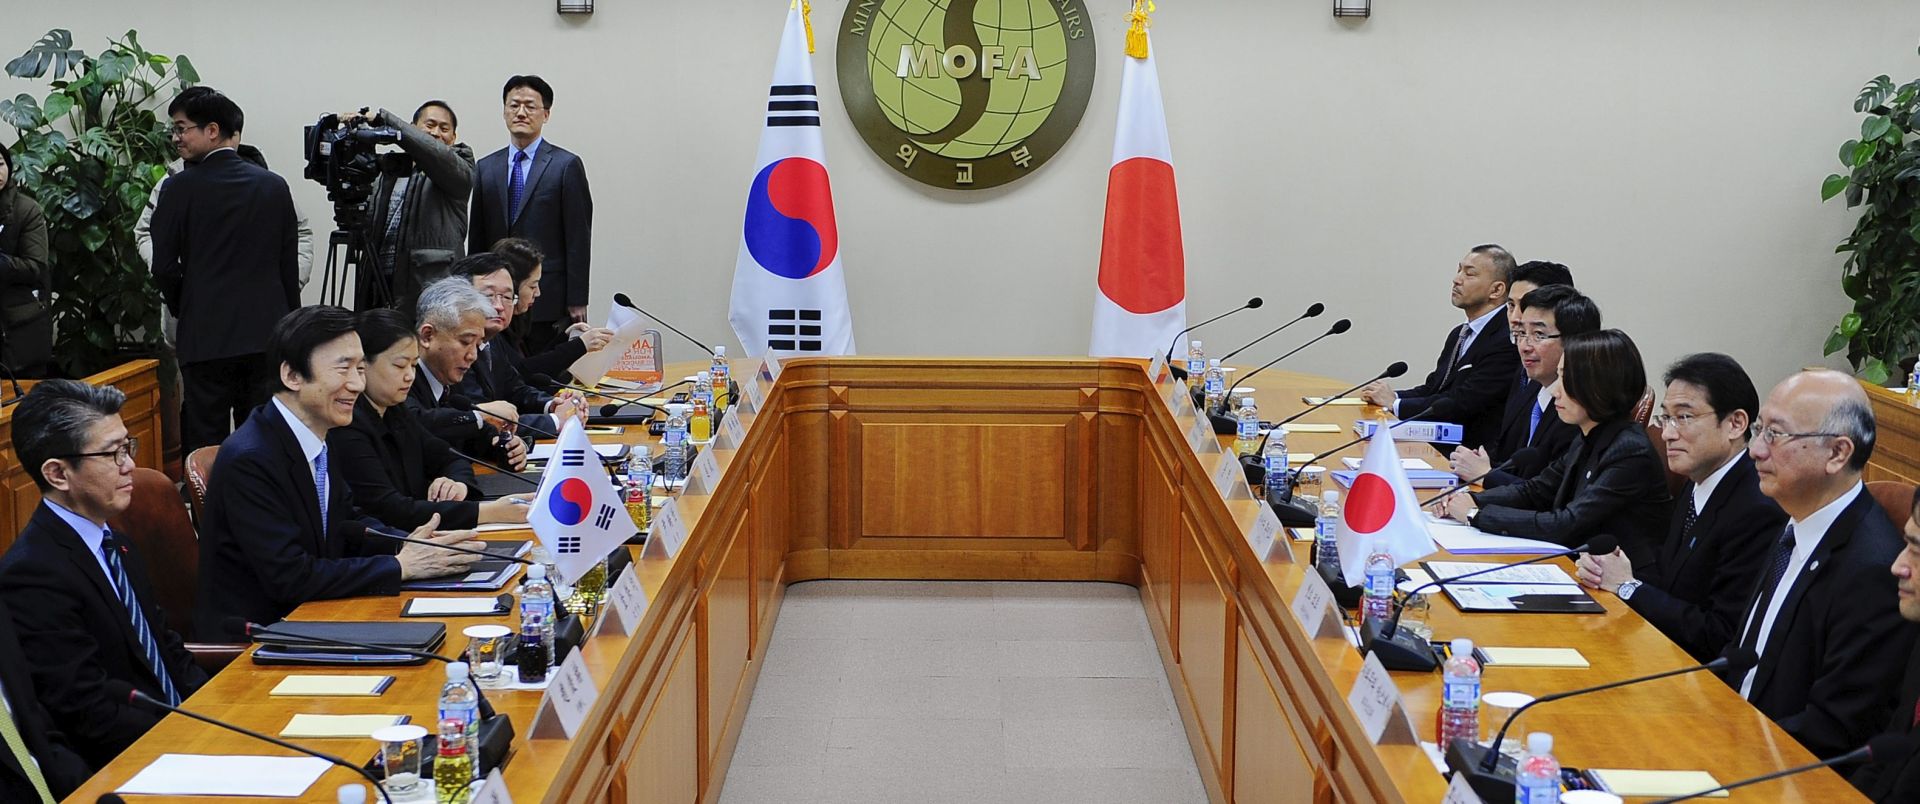 epa05081999 Japanese foreign minister Fumio Kishida (2R), talks with South Koren counterpart Yun Byung-Se (2L) during their meeting at the Foreign Ministry in Seoul, South Korea, 28 December 2015. Fumio Kishida arrived in Seoul for talks with his South Korean counterpart Yun Byung-se, possibly setting a new direction in resolving the issue of the comfort women. The two countries have been in negotiations on one of the most contentious issues between them -- Japan's sexual enslavement of women, mostly Koreans, for its soldiers during World War II.  EPA/KIM MIN-HEE/POOL